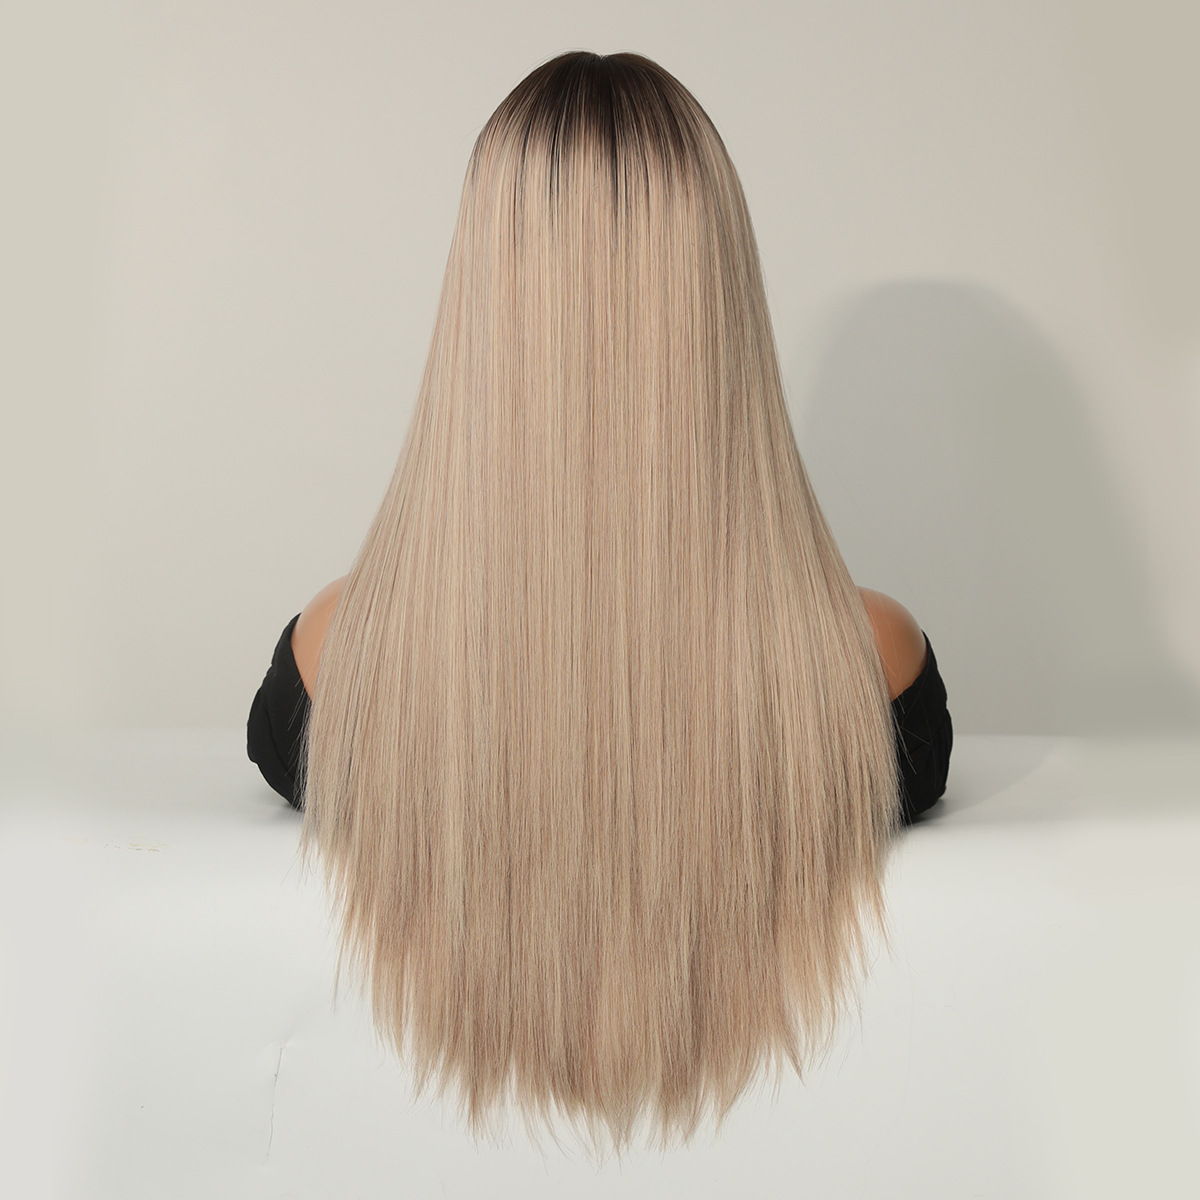 A stylish synthetic wig in champagne blonde with long straight hair, ready to go for any occasion